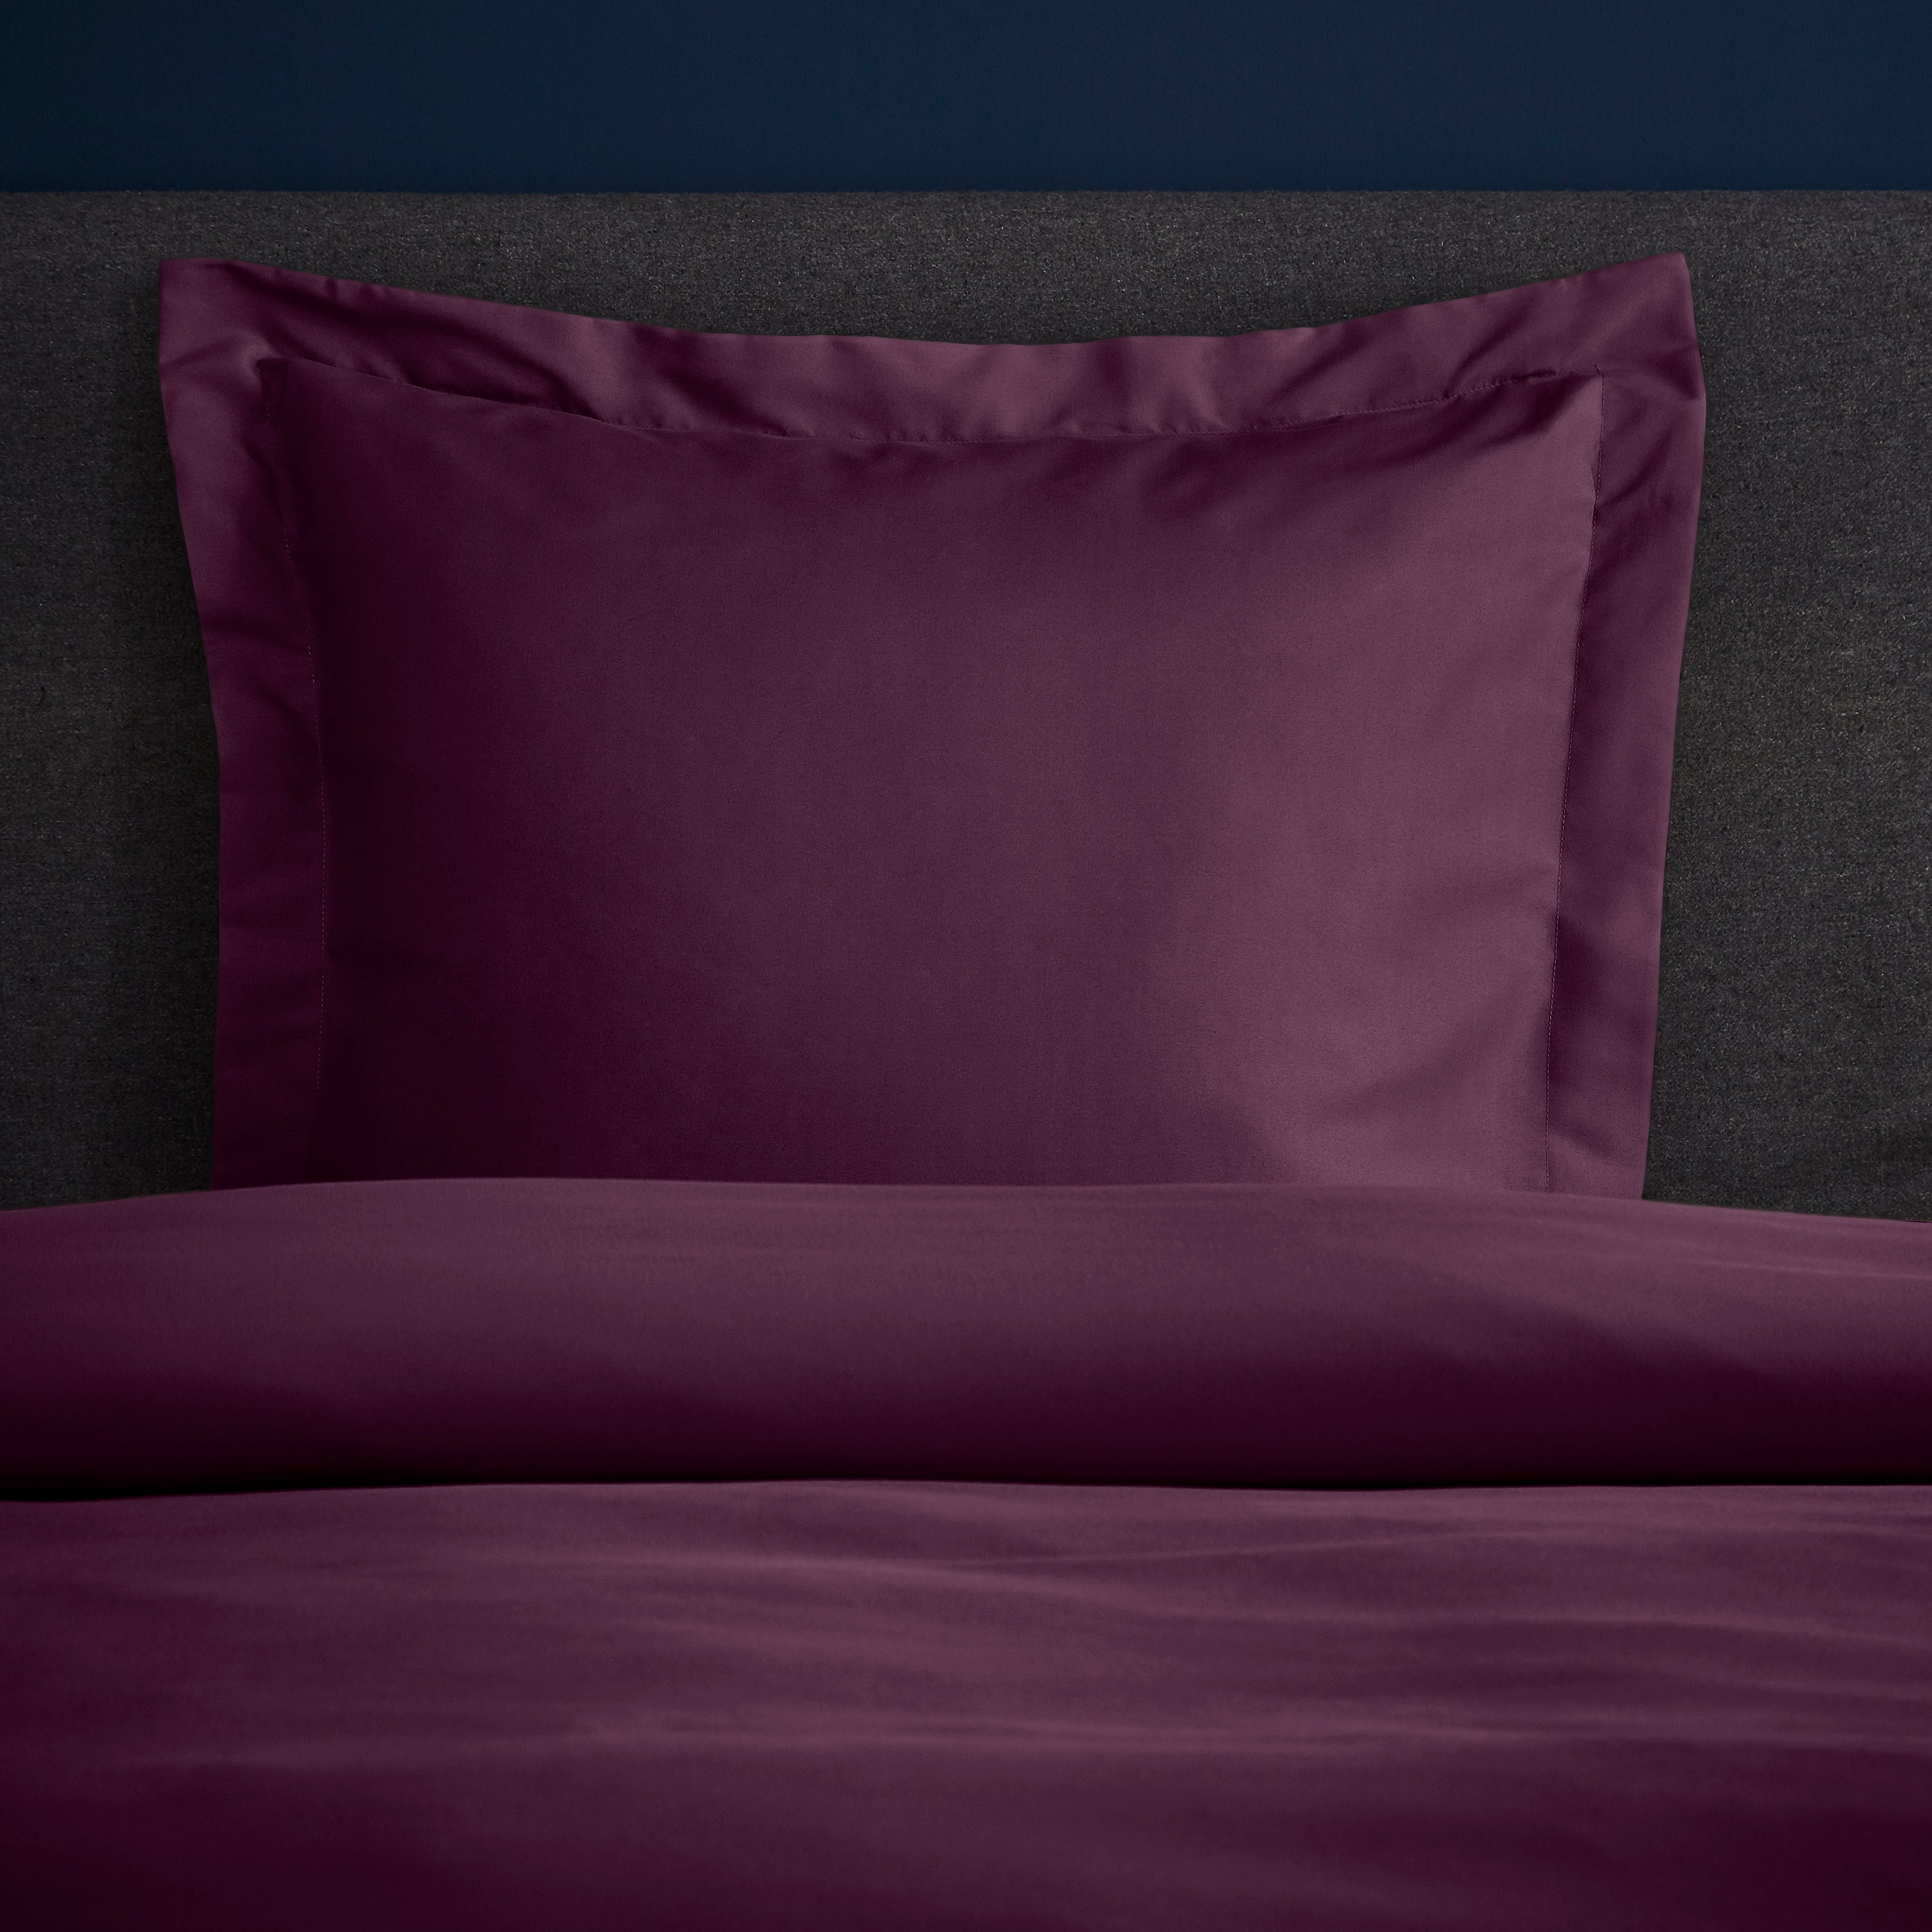 Image of Fogarty Soft Touch Plum Continental Square Pillowcase Plum Purple